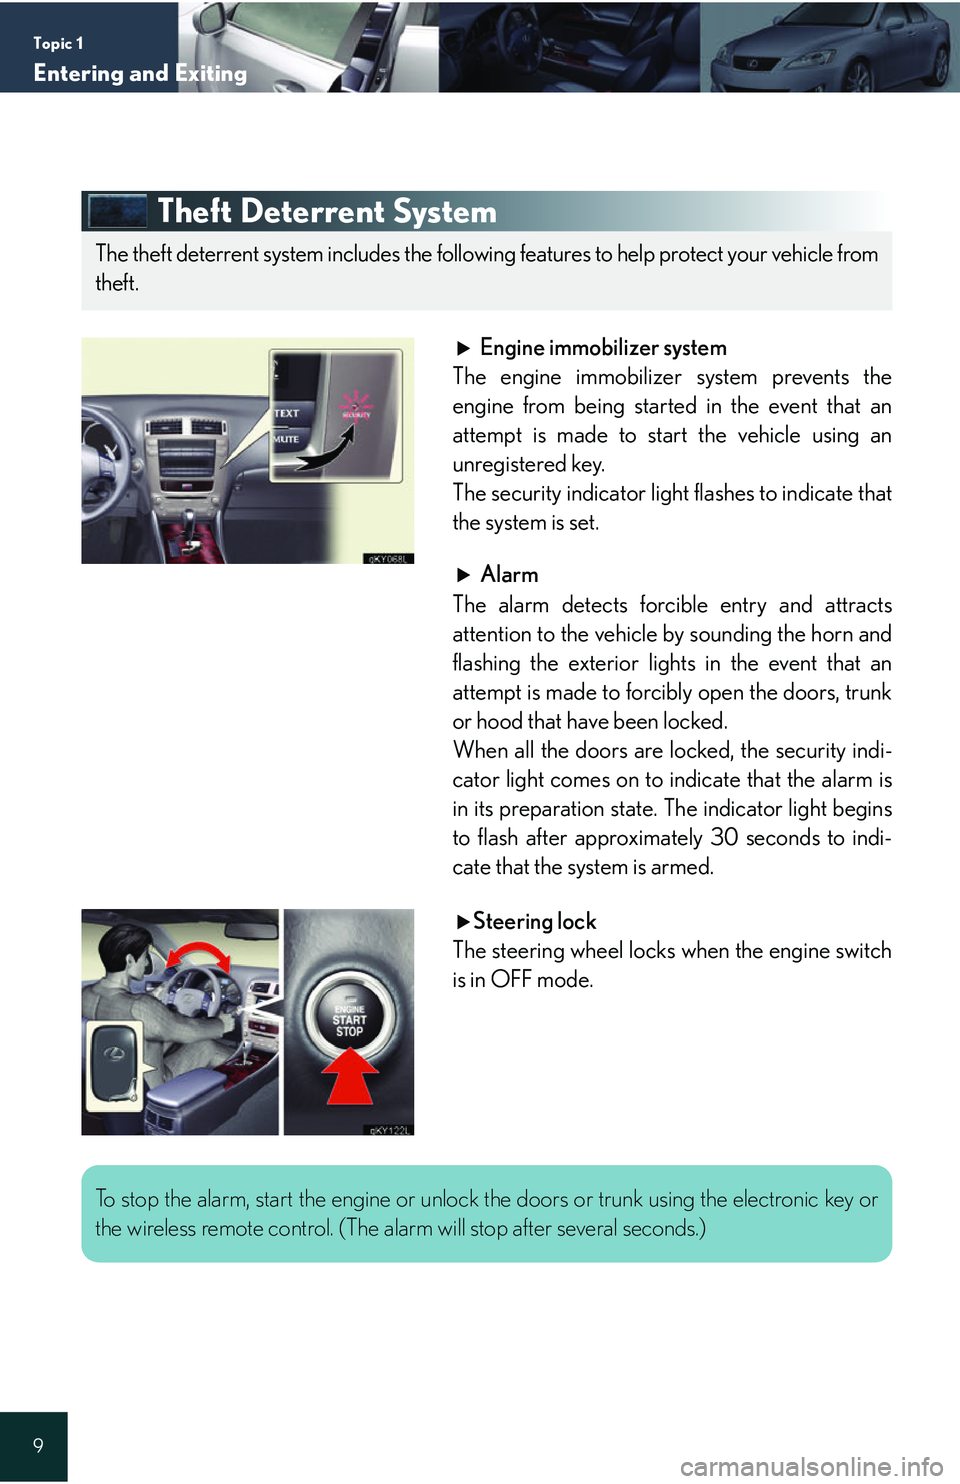 Lexus IS250 2006  Other Functions / LEXUS 2006 IS350/250 QUICK REFERENCE GUIDE Topic 1
Entering and Exiting
9
Theft Deterrent System
Engine immobilizer system
The engine immobilizer system prevents the
engine from being started in the event that an
attempt is made to start the v